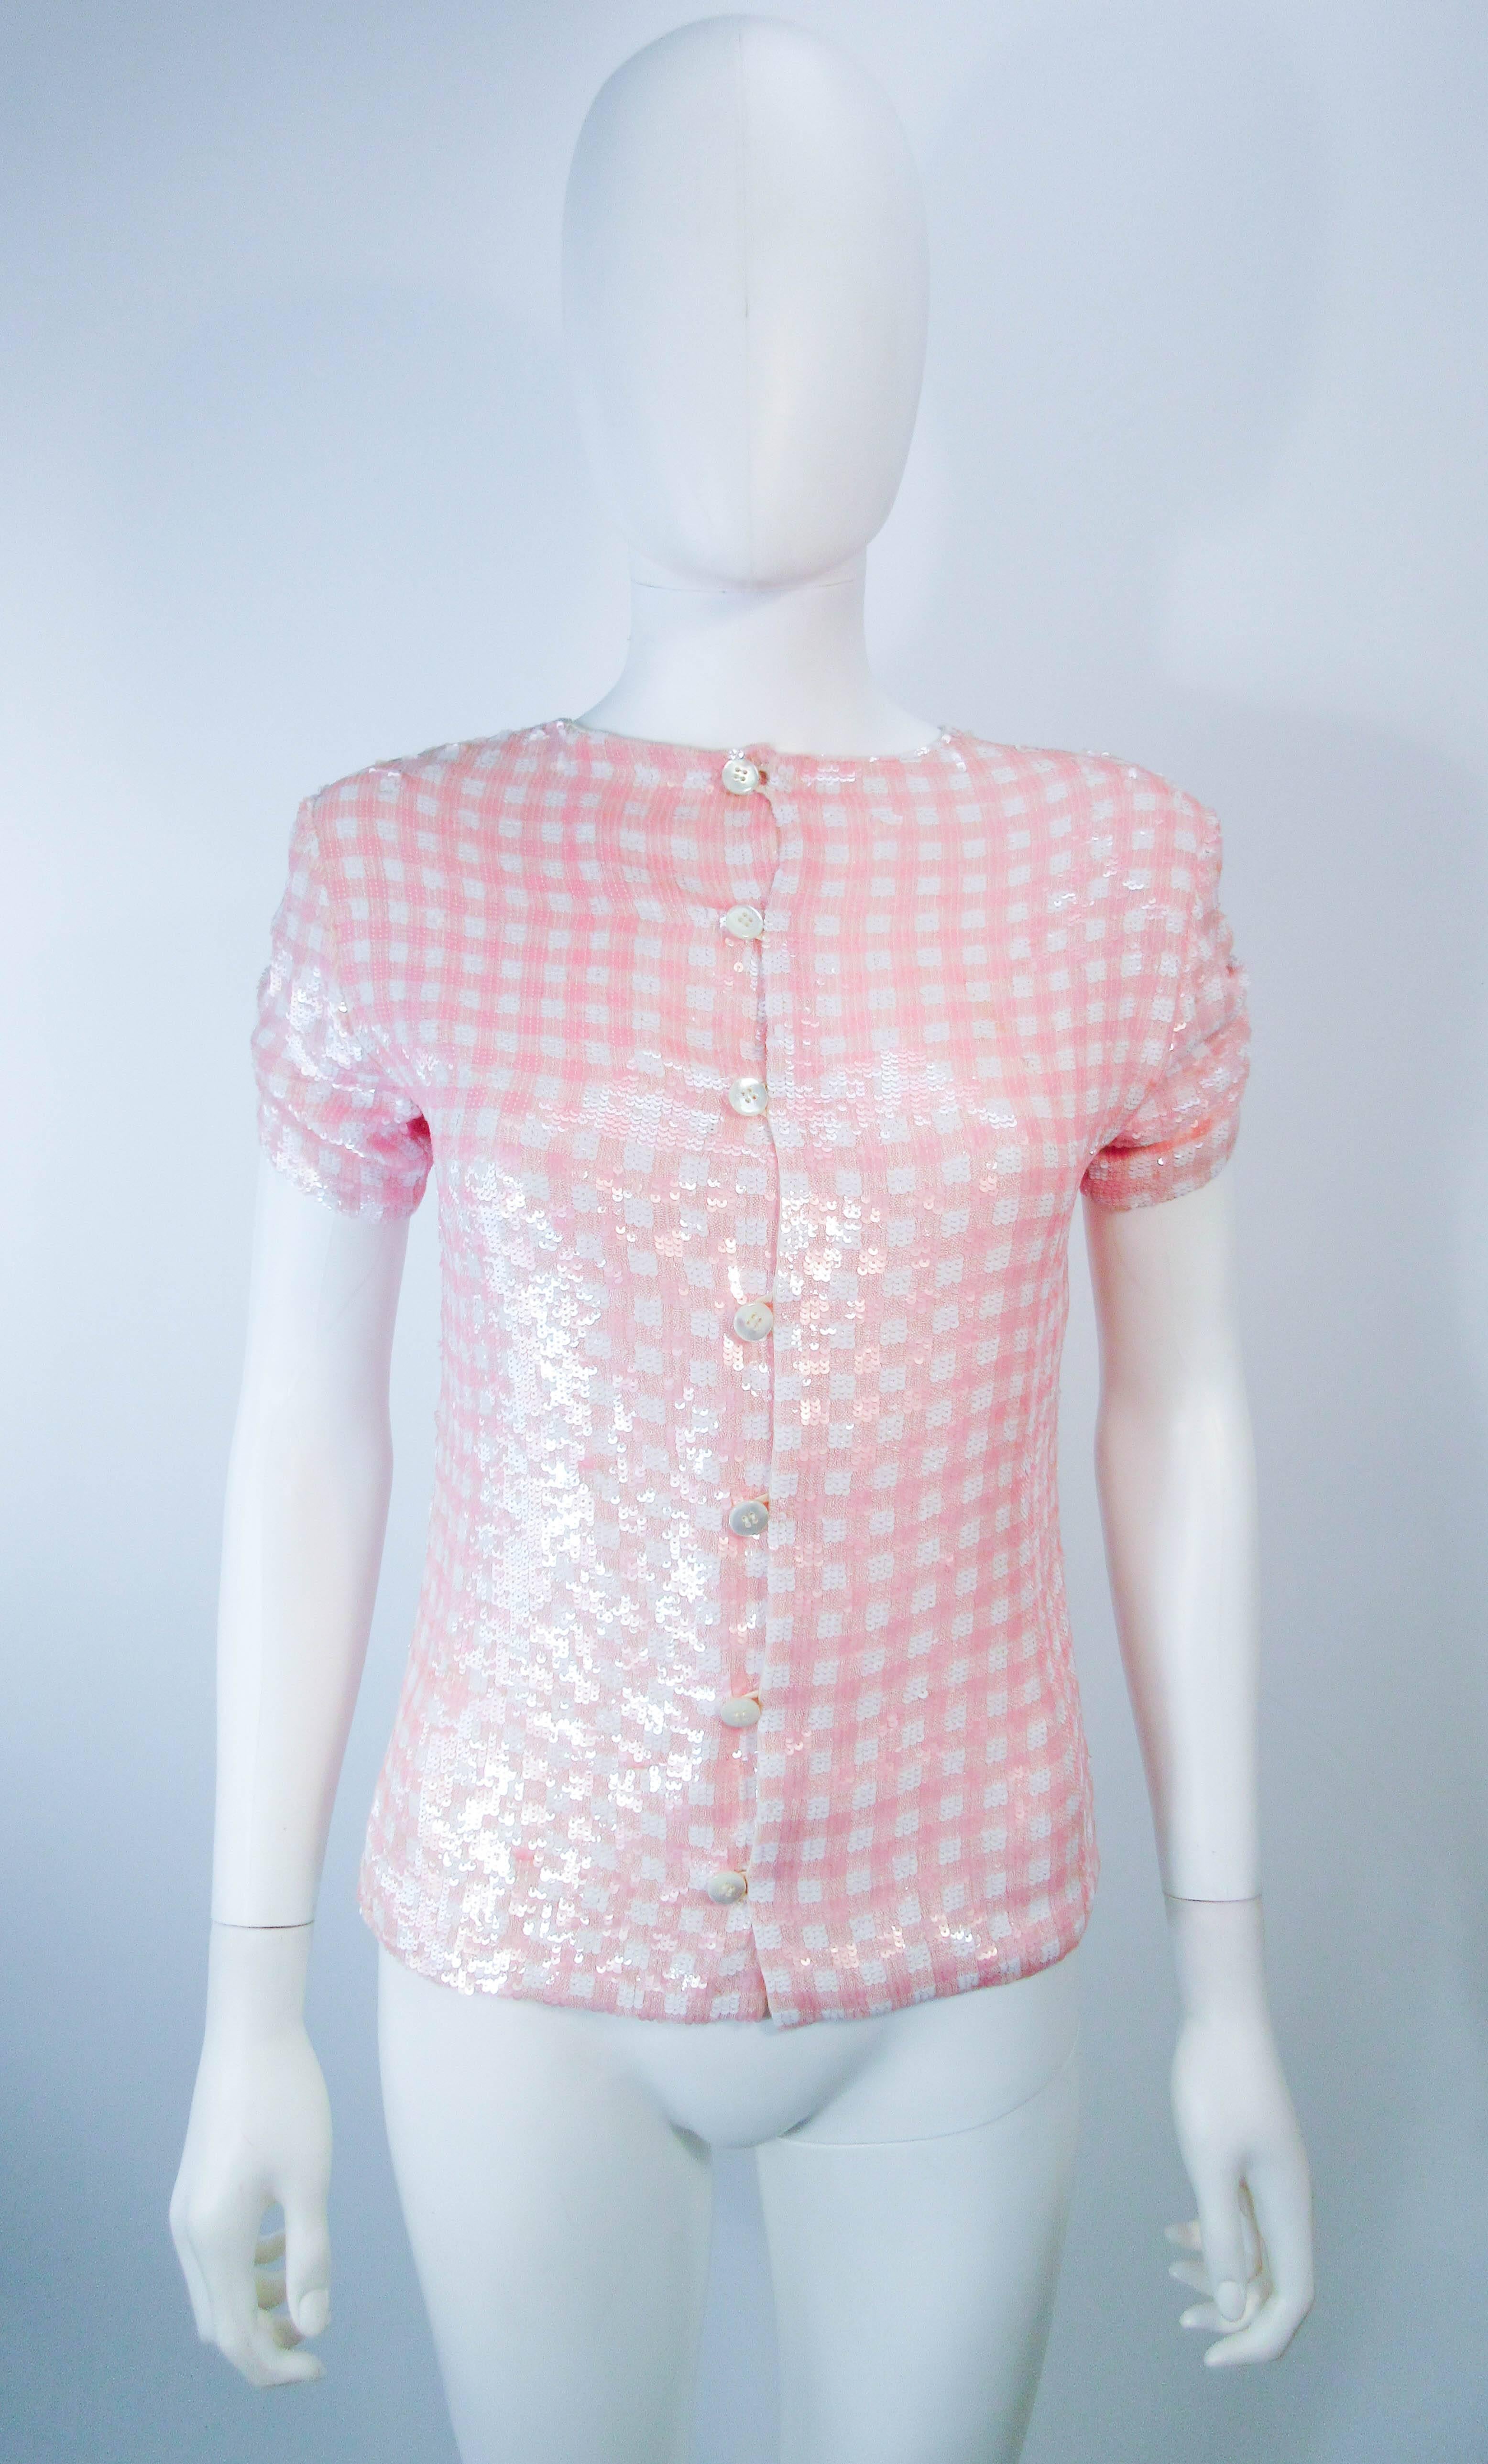 This Bill Blass blouse is composed of pink and white sequins. Features center front buttons, and a gathered sleeve design. In excellent vintage condition (shows some signs of wear due to wear).

  **Please cross-reference measurements for personal